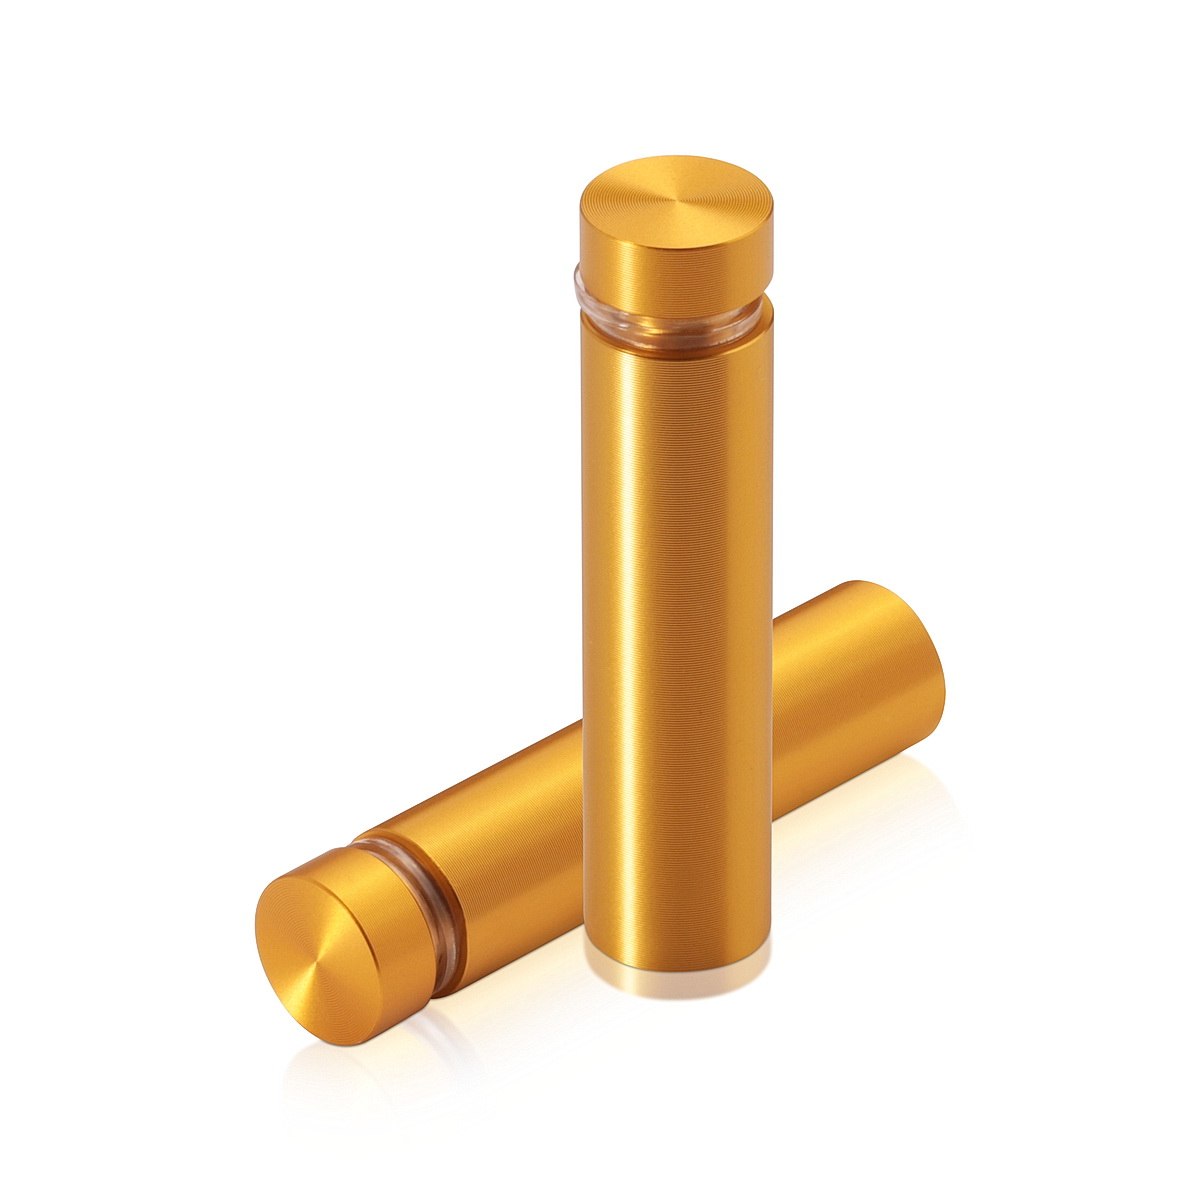 1/2'' Diameter X 1-3/4'' Barrel Length, Aluminum Flat Head Standoffs, Gold Anodized Finish Easy Fasten Standoff (For Inside / Outside use) Tamper Proof Standoff [Required Material Hole Size: 3/8'']